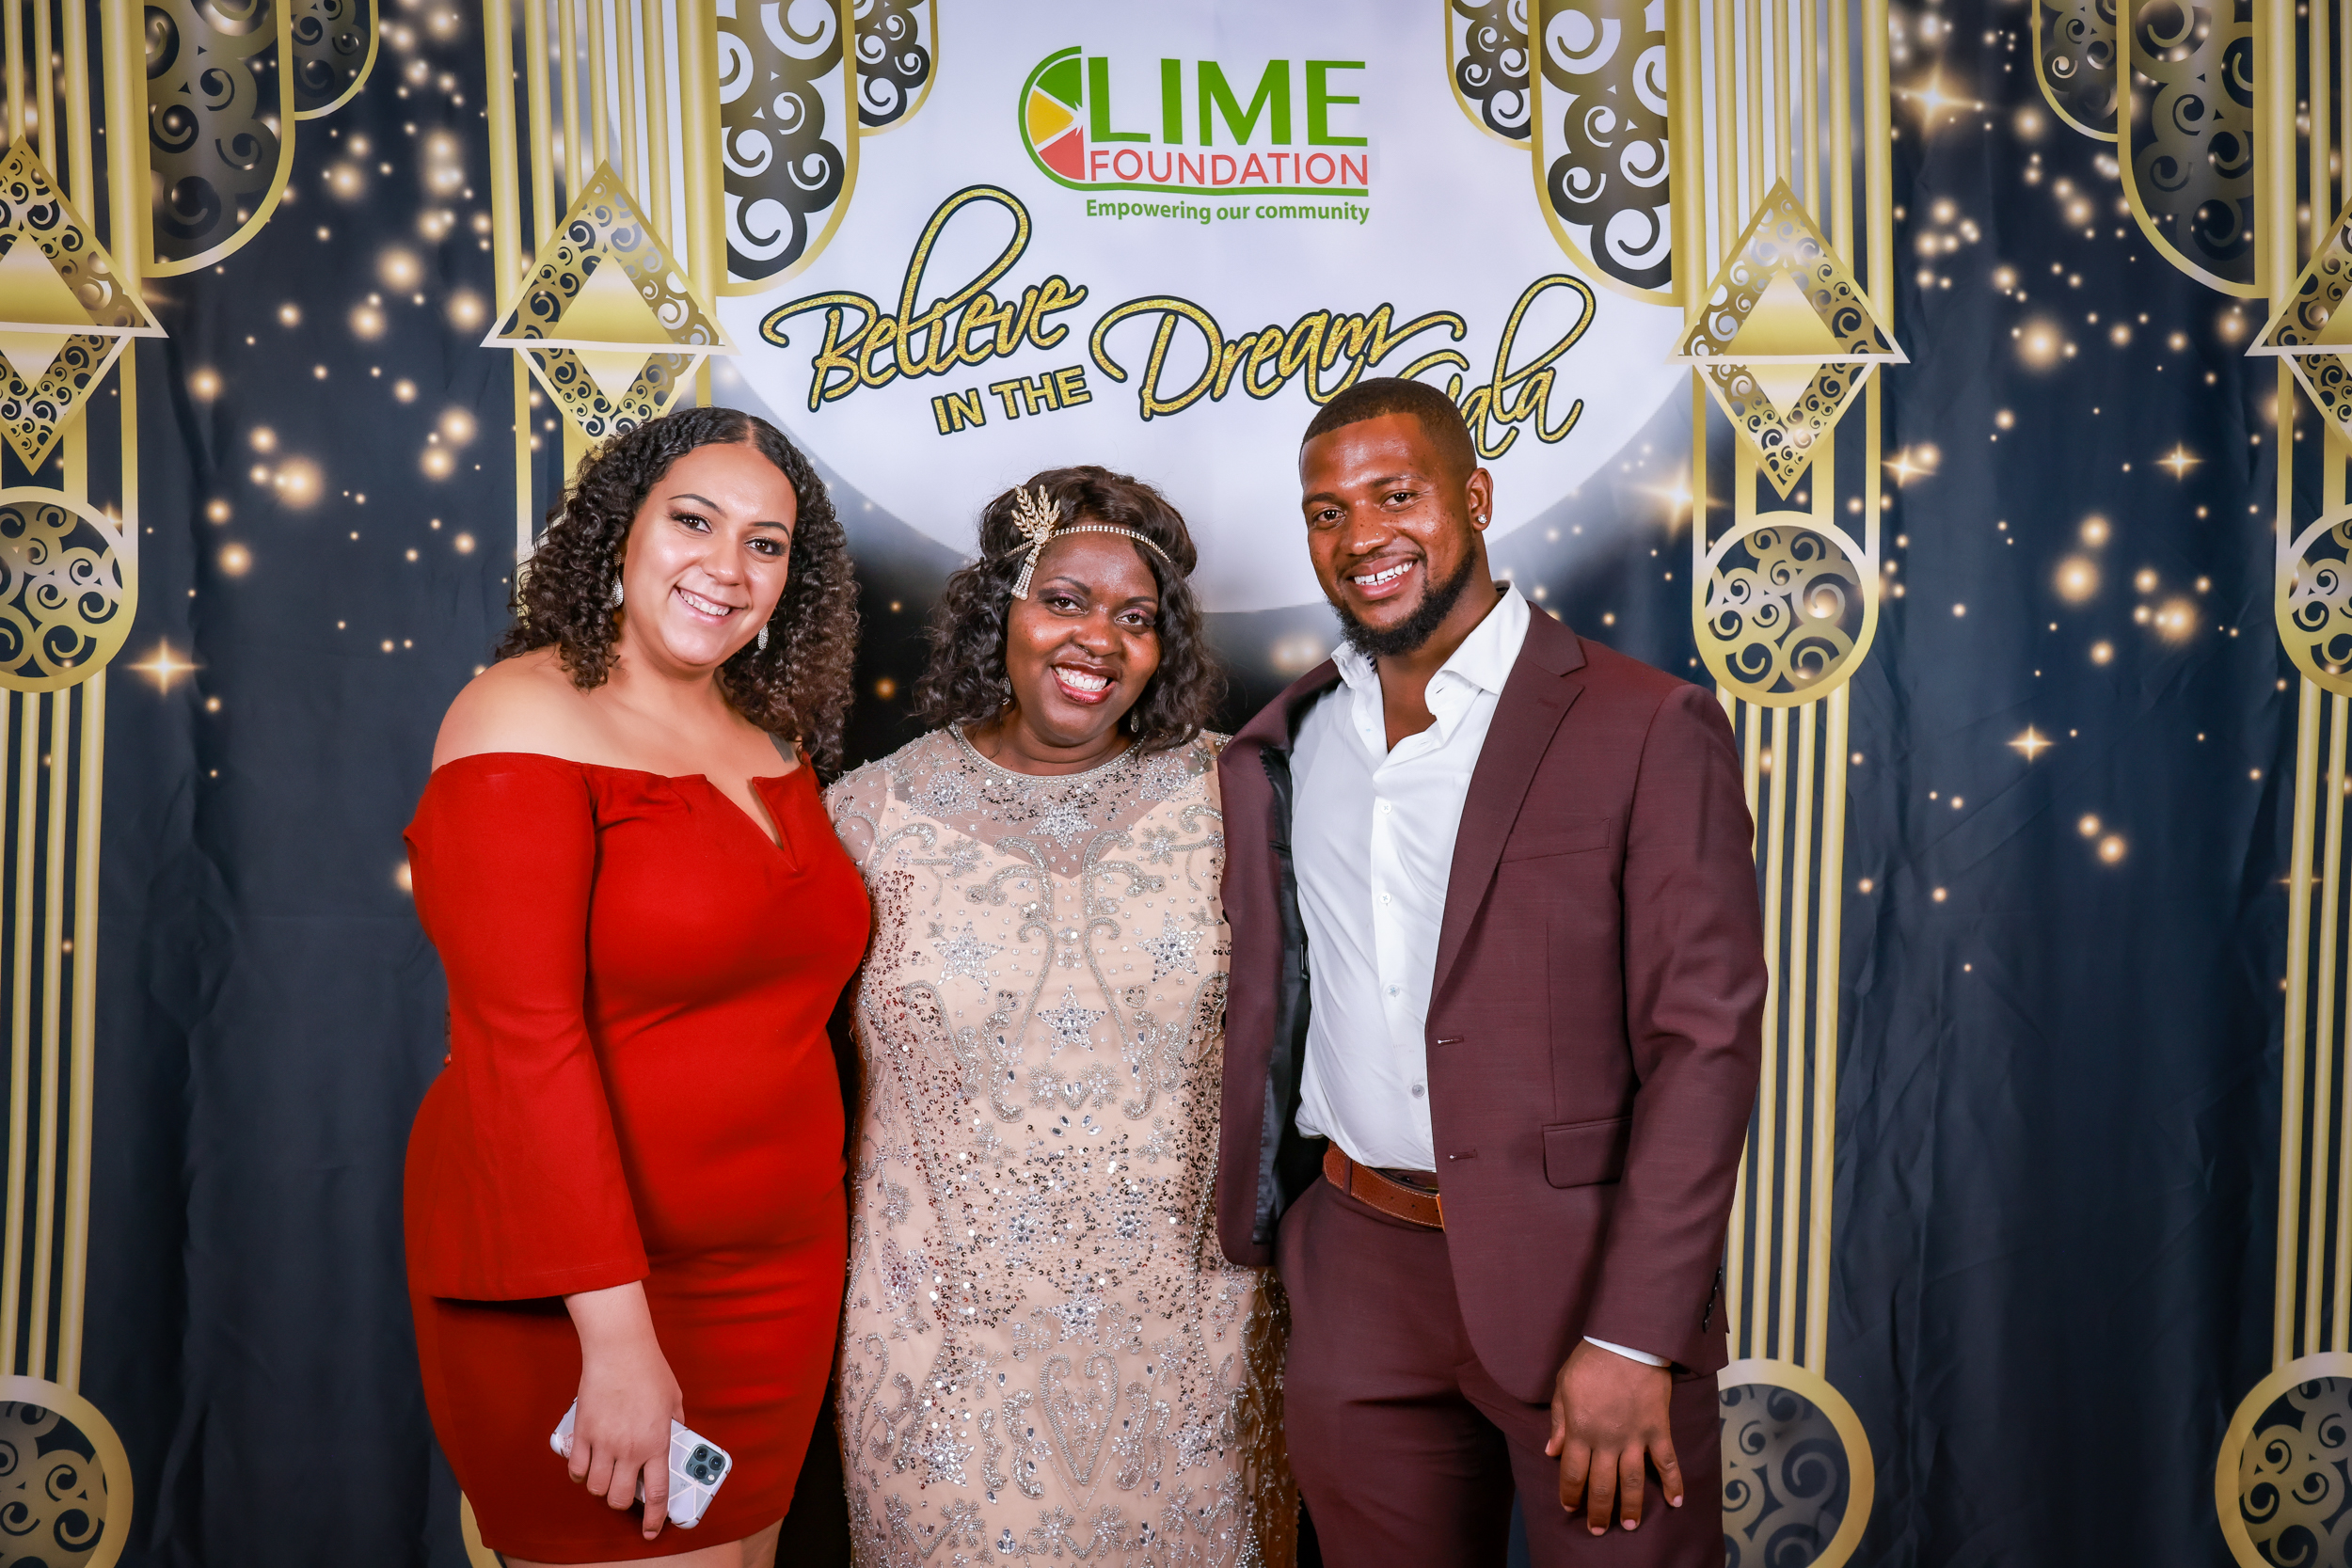 Three people posing for a photo at a Santa Rosa non-profit event hosted by The LIME Foundation.